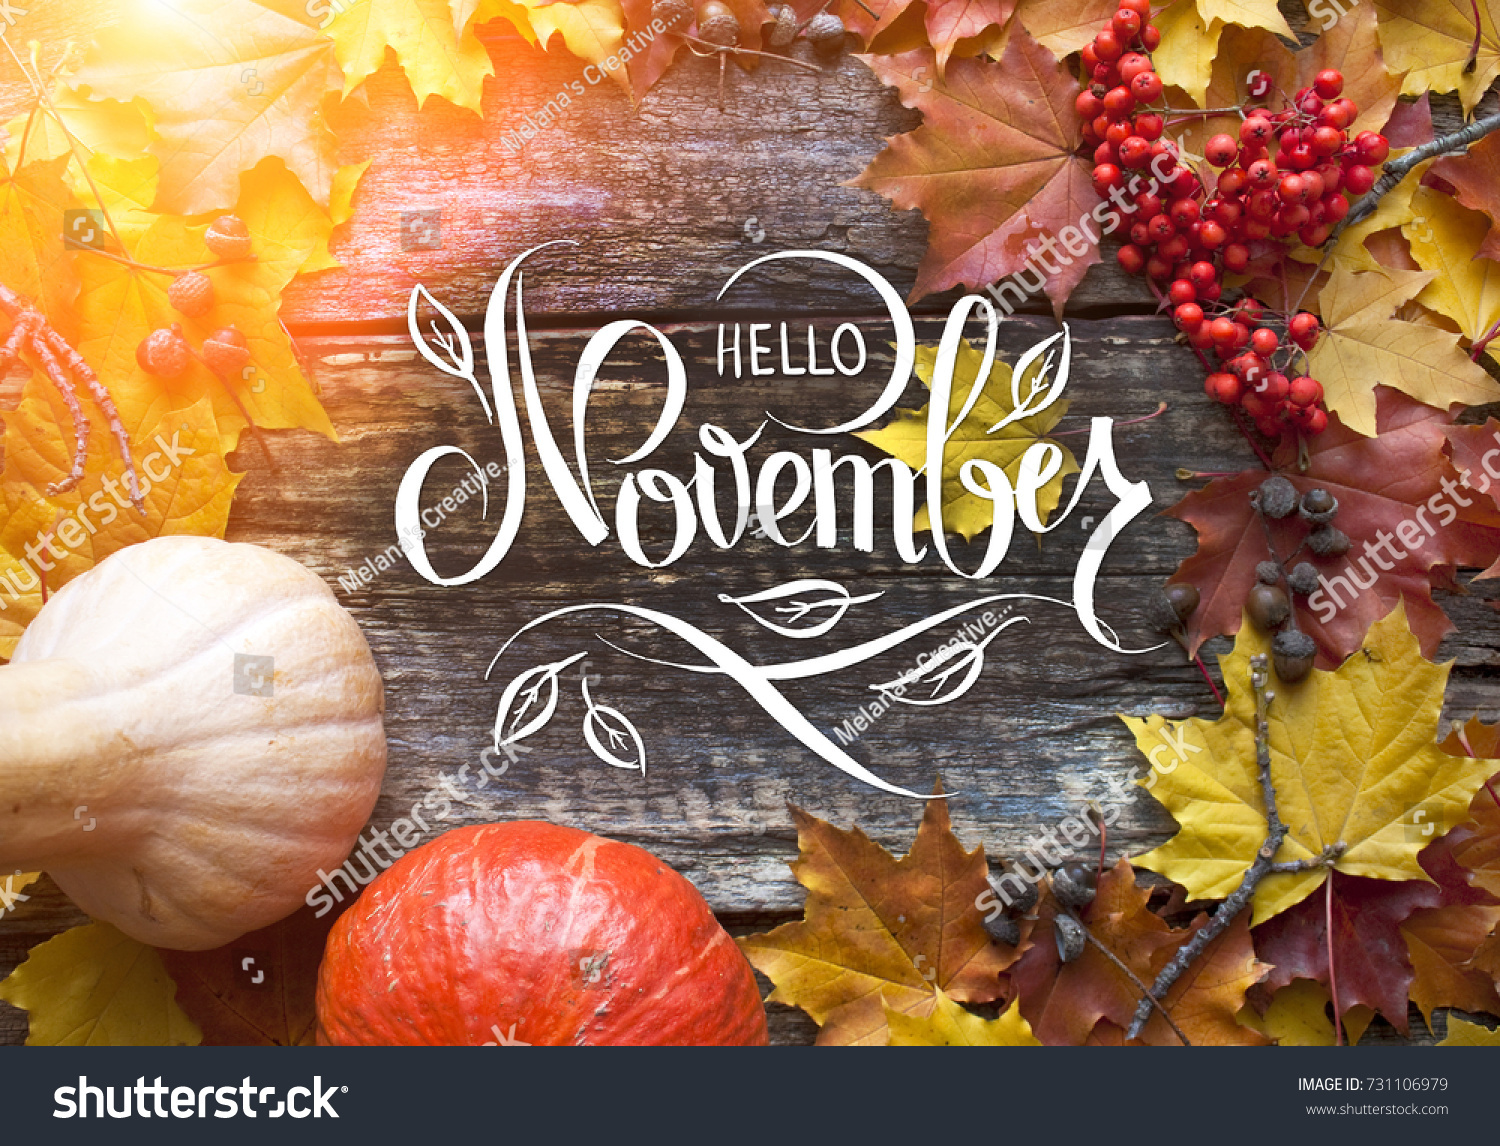 Great season texture with fall mood. Nature november background with hand lettering "Hello November". #731106979